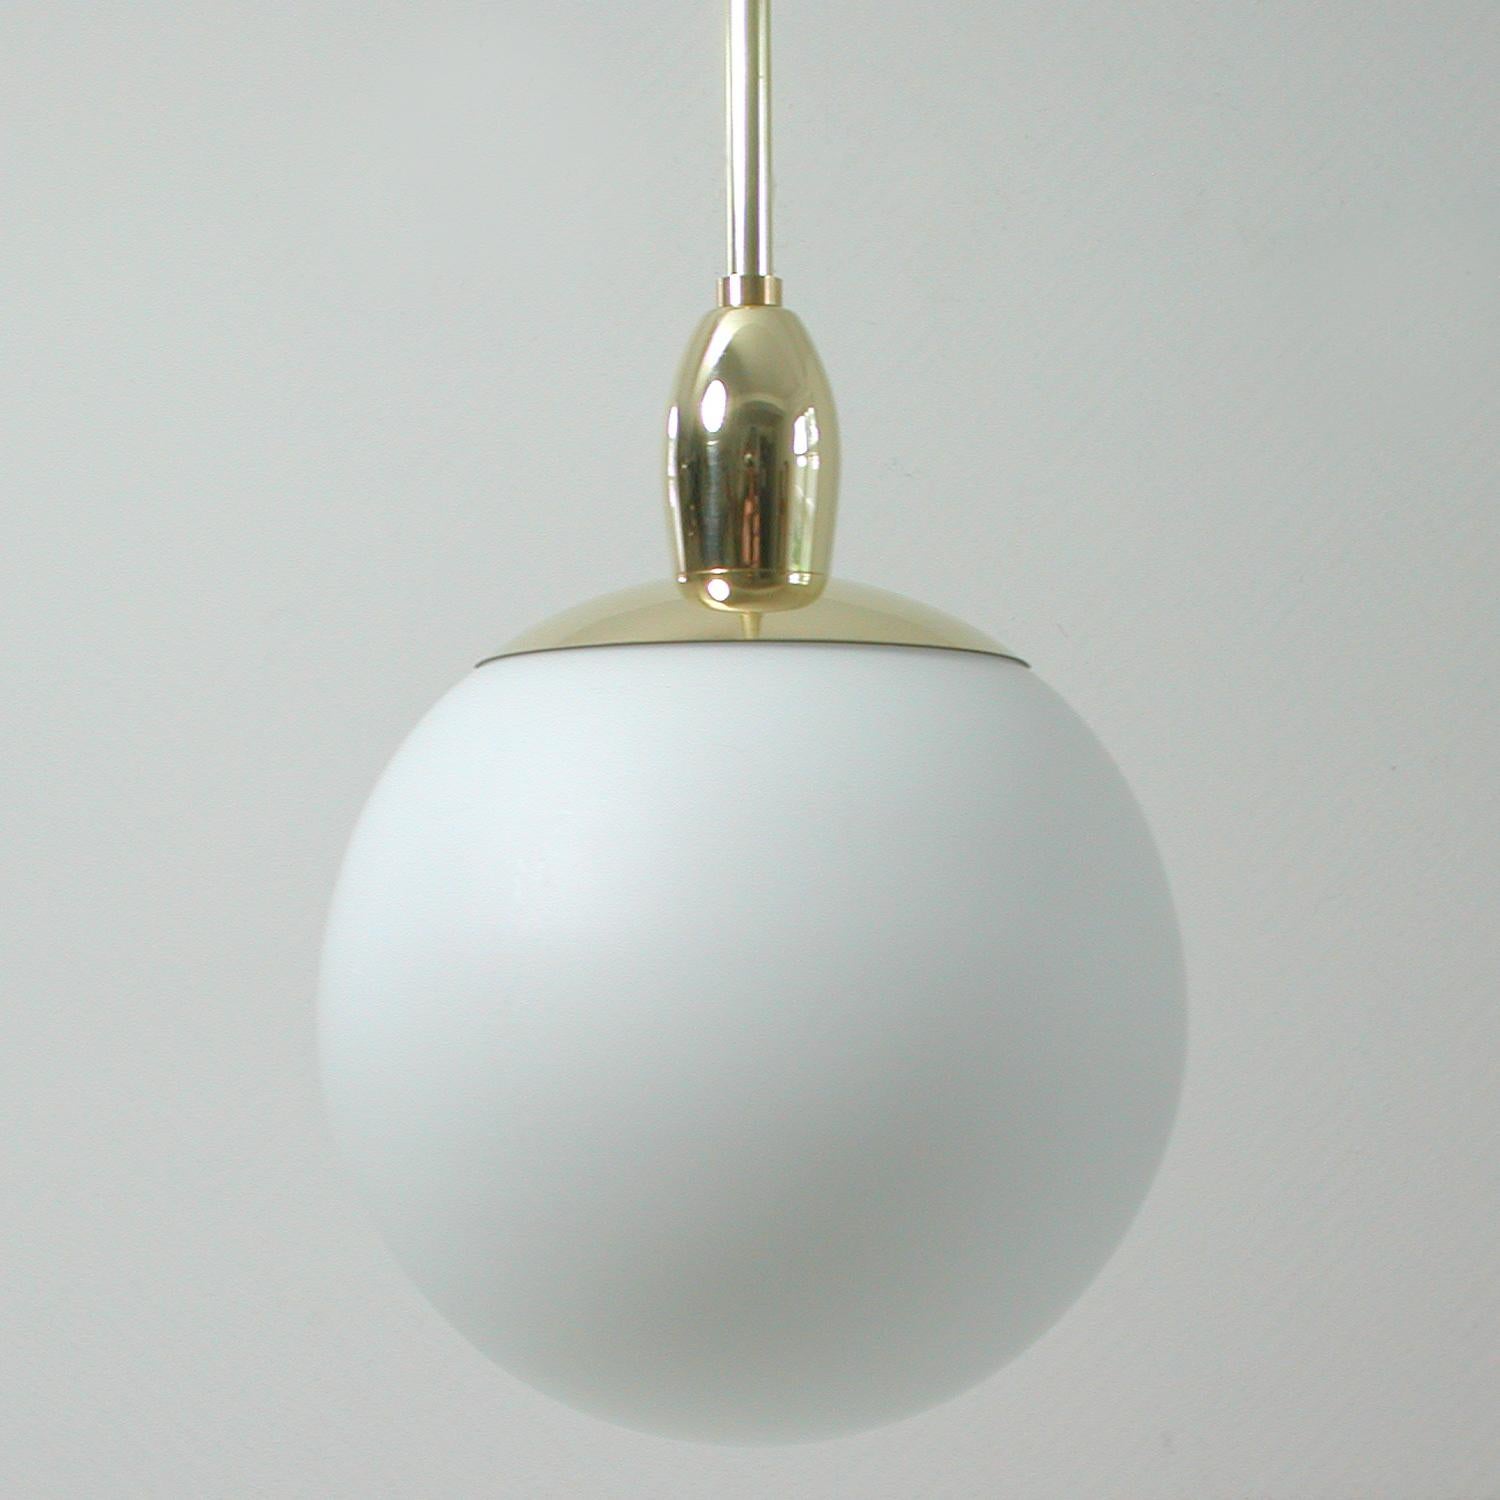 Pair of Mid-Century Modern Italian Satinated Glass and Brass Pendants, 1960s For Sale 1